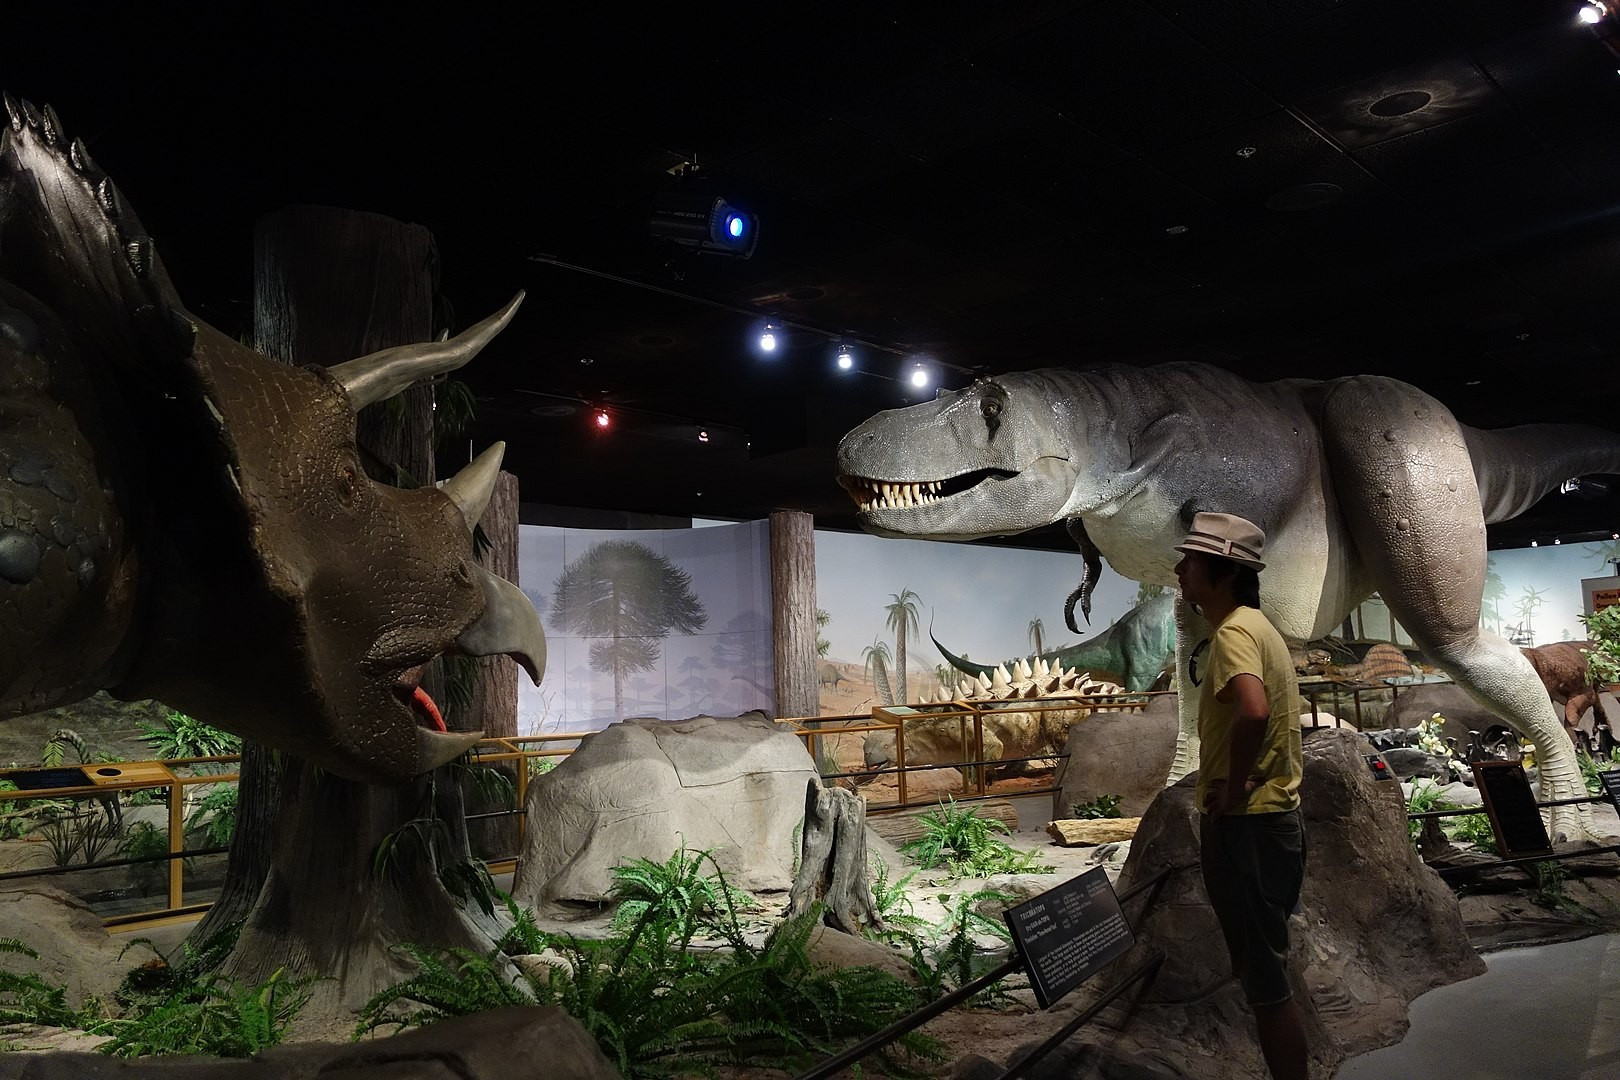 By kennejima - Las Vegas Natural History Museum, CC BY 2.0, https://commons.wikimedia.org/w/index.php?curid=59796741